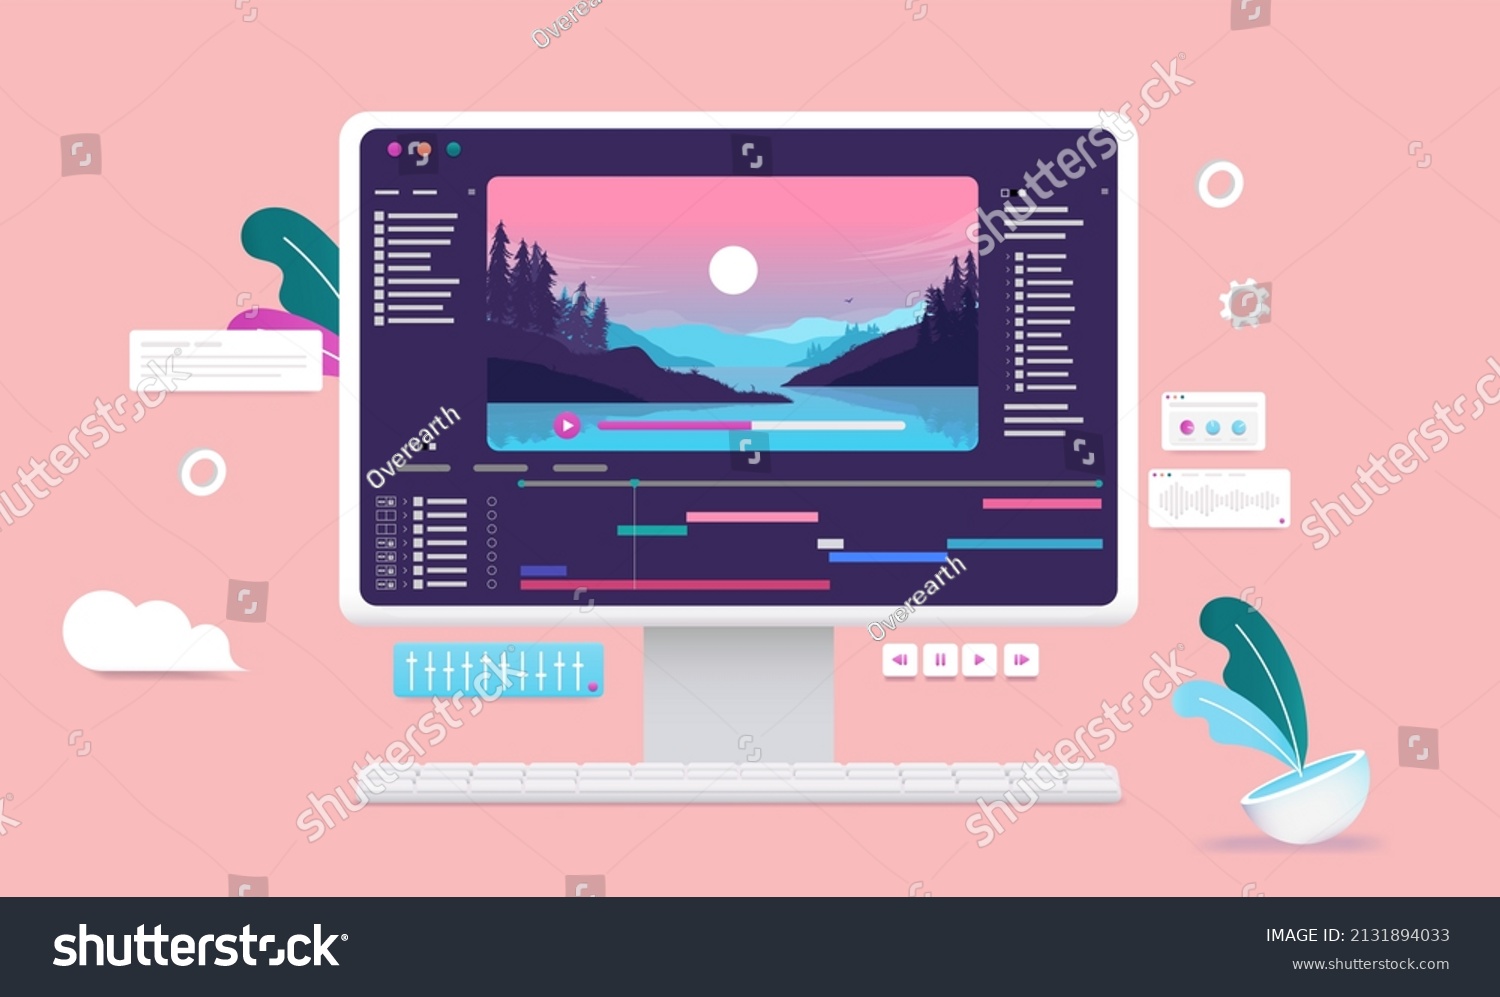 SVG of Video editing on desktop computer - Software for movie production on screen with nature scene, timeline and user interface. Multimedia and film editor concept. Vector illustration svg